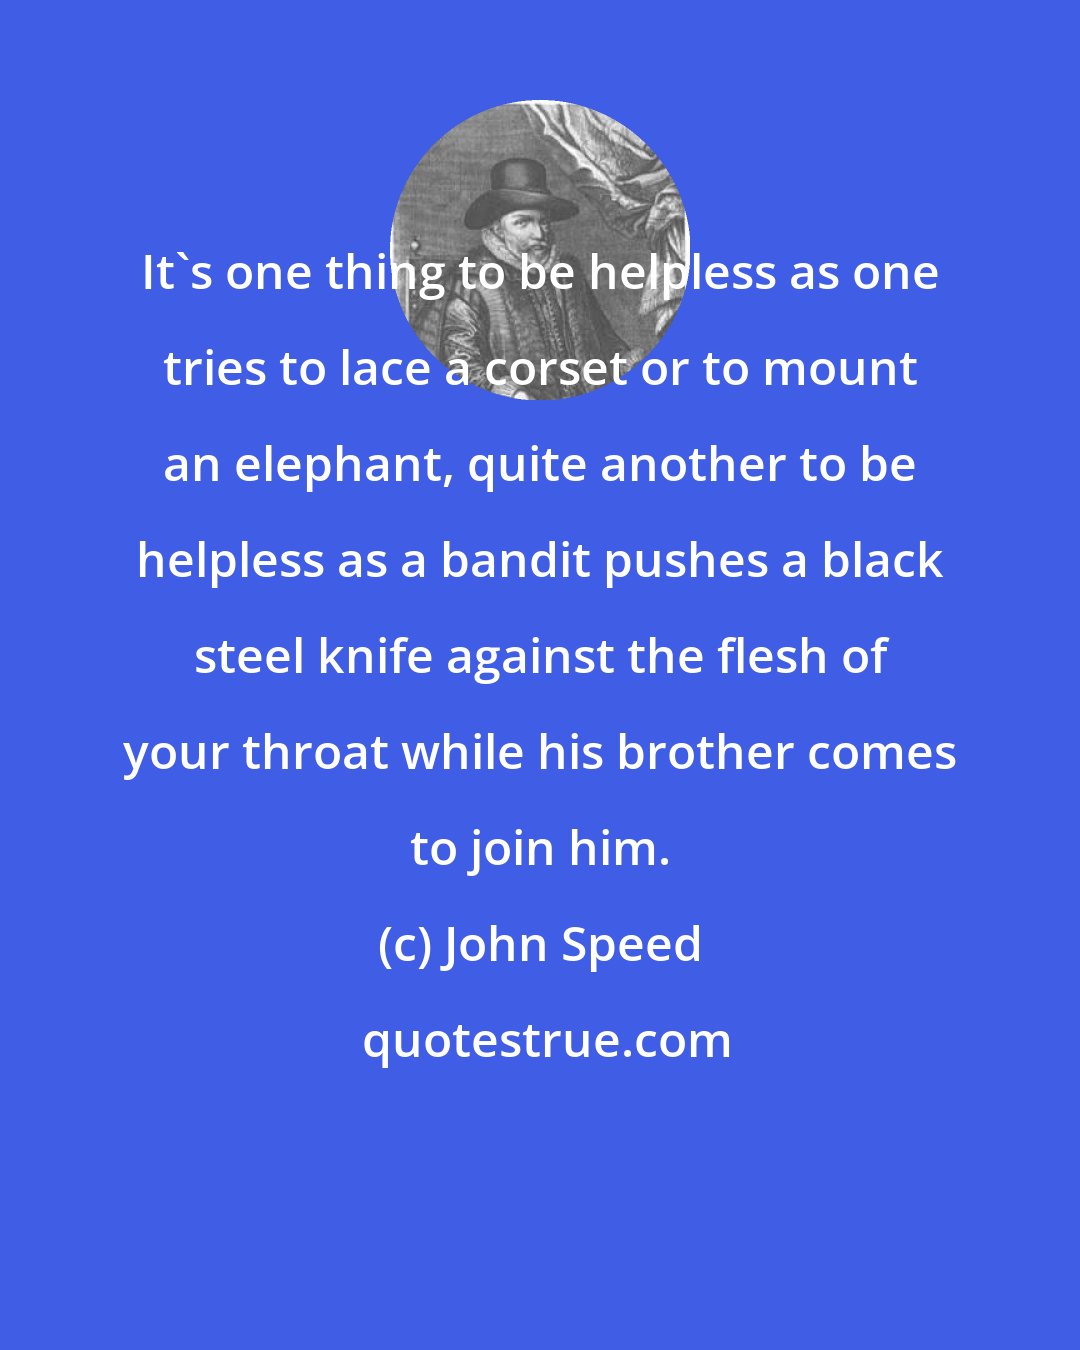 John Speed: It's one thing to be helpless as one tries to lace a corset or to mount an elephant, quite another to be helpless as a bandit pushes a black steel knife against the flesh of your throat while his brother comes to join him.